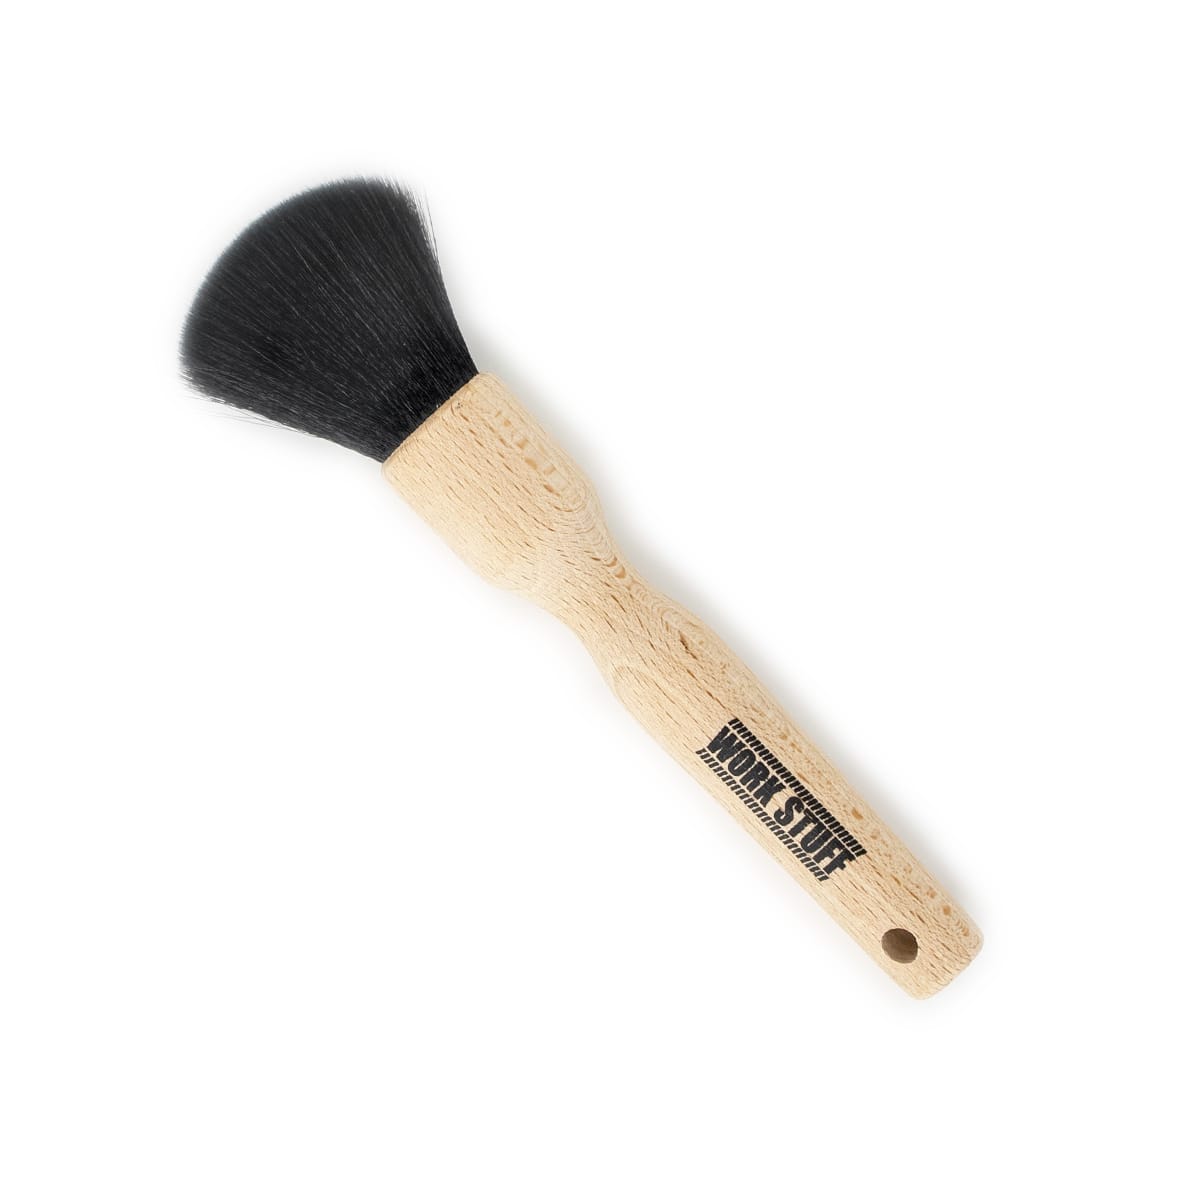 SONAX Detailing Brush 28mm Round – MG Mécanique & Performance